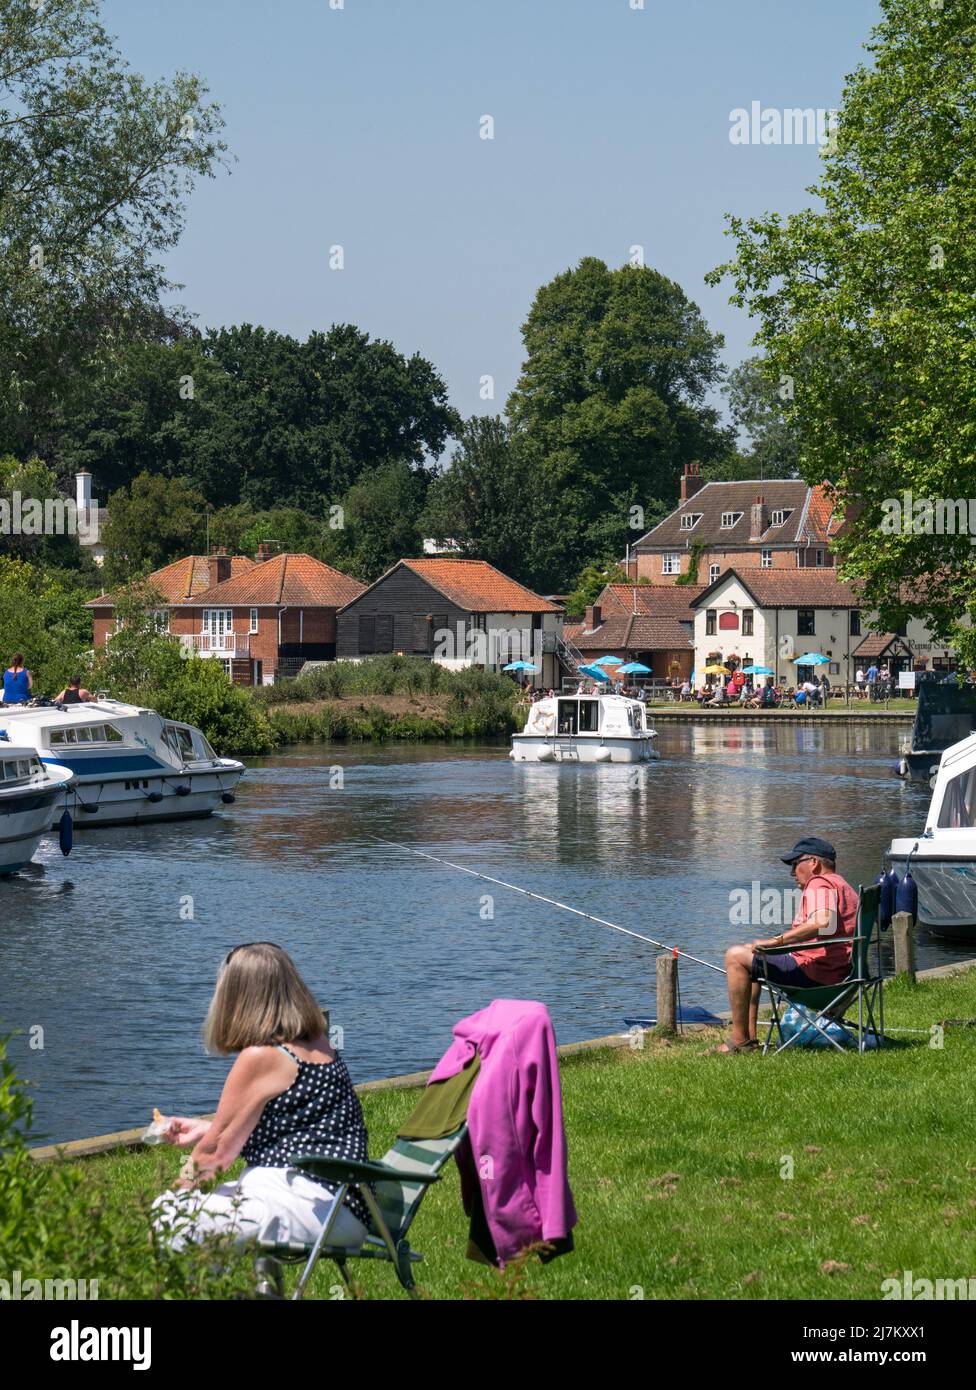 The River Bure on The Norfolk Broads at Coltishall, popular for picnicking & fishing, as well as boating, Coltishall, Norfolk, England, UK, Stock Photo